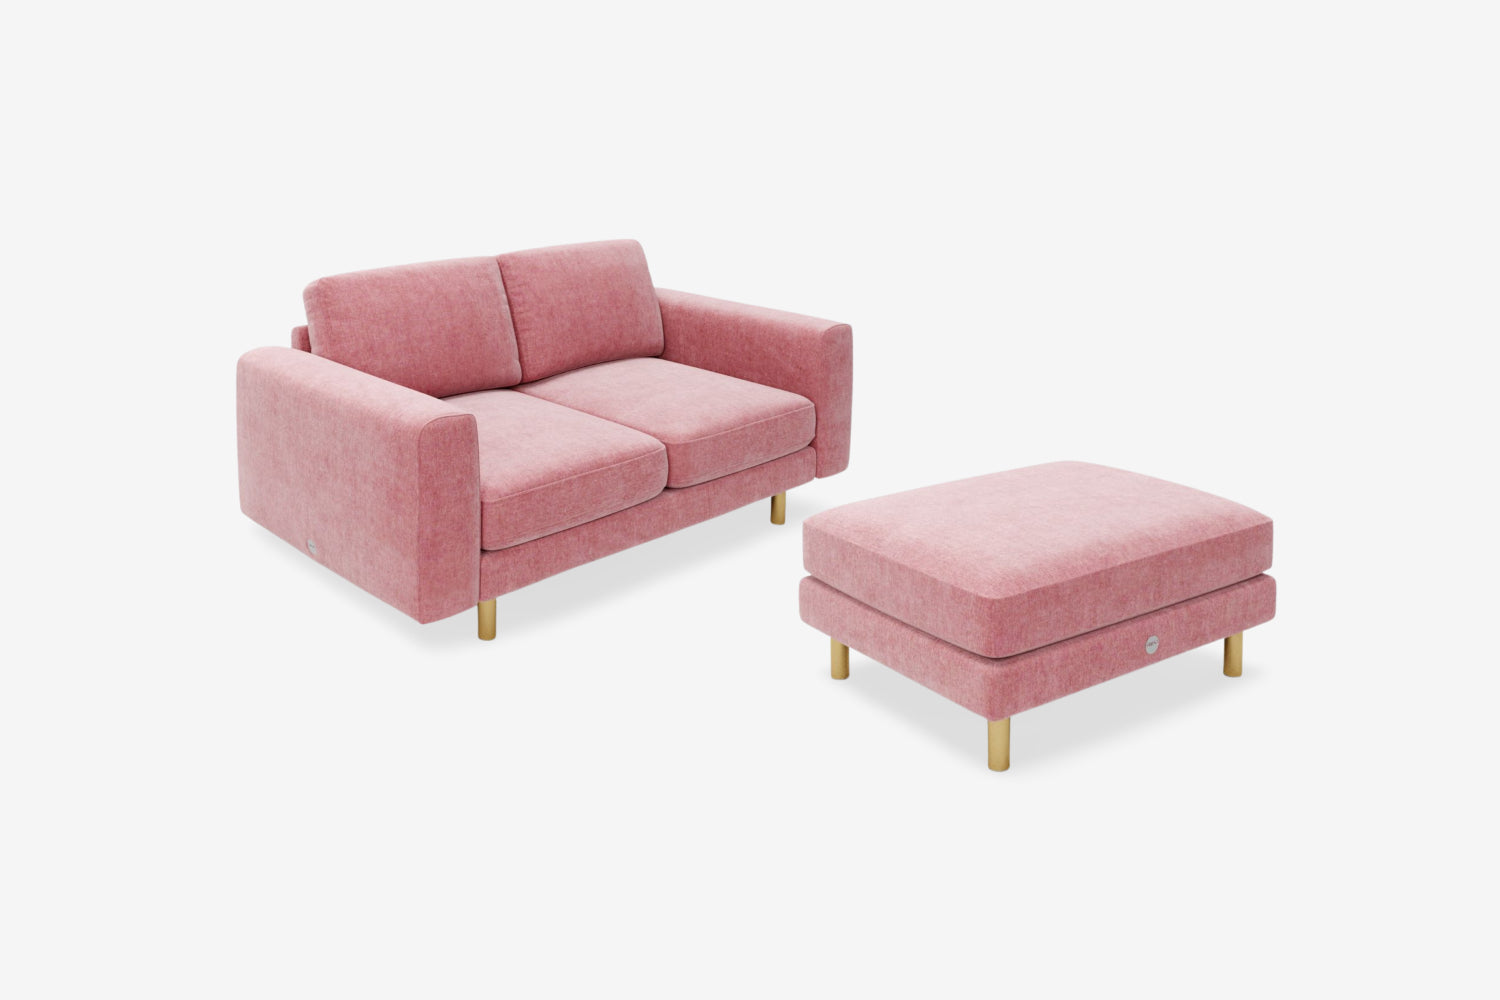 The Big Chill - 2 Seater Sofa and Footstool Set - Blush Coral